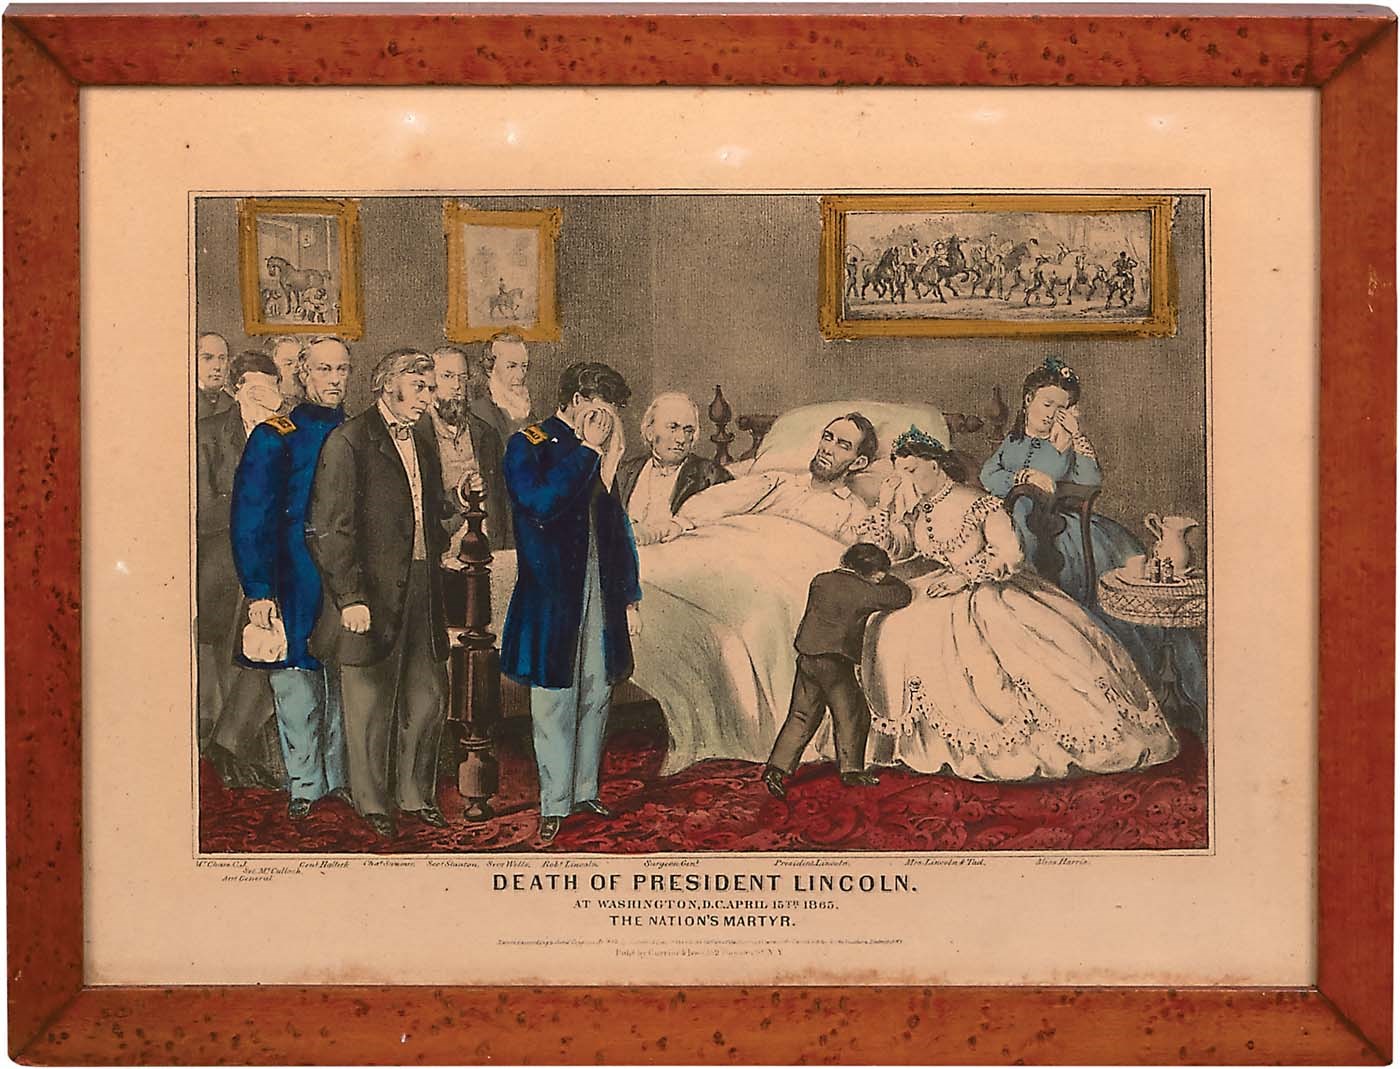 Rock And Pop Culture - 1865 "Death of President Lincoln" by Currier & Ives